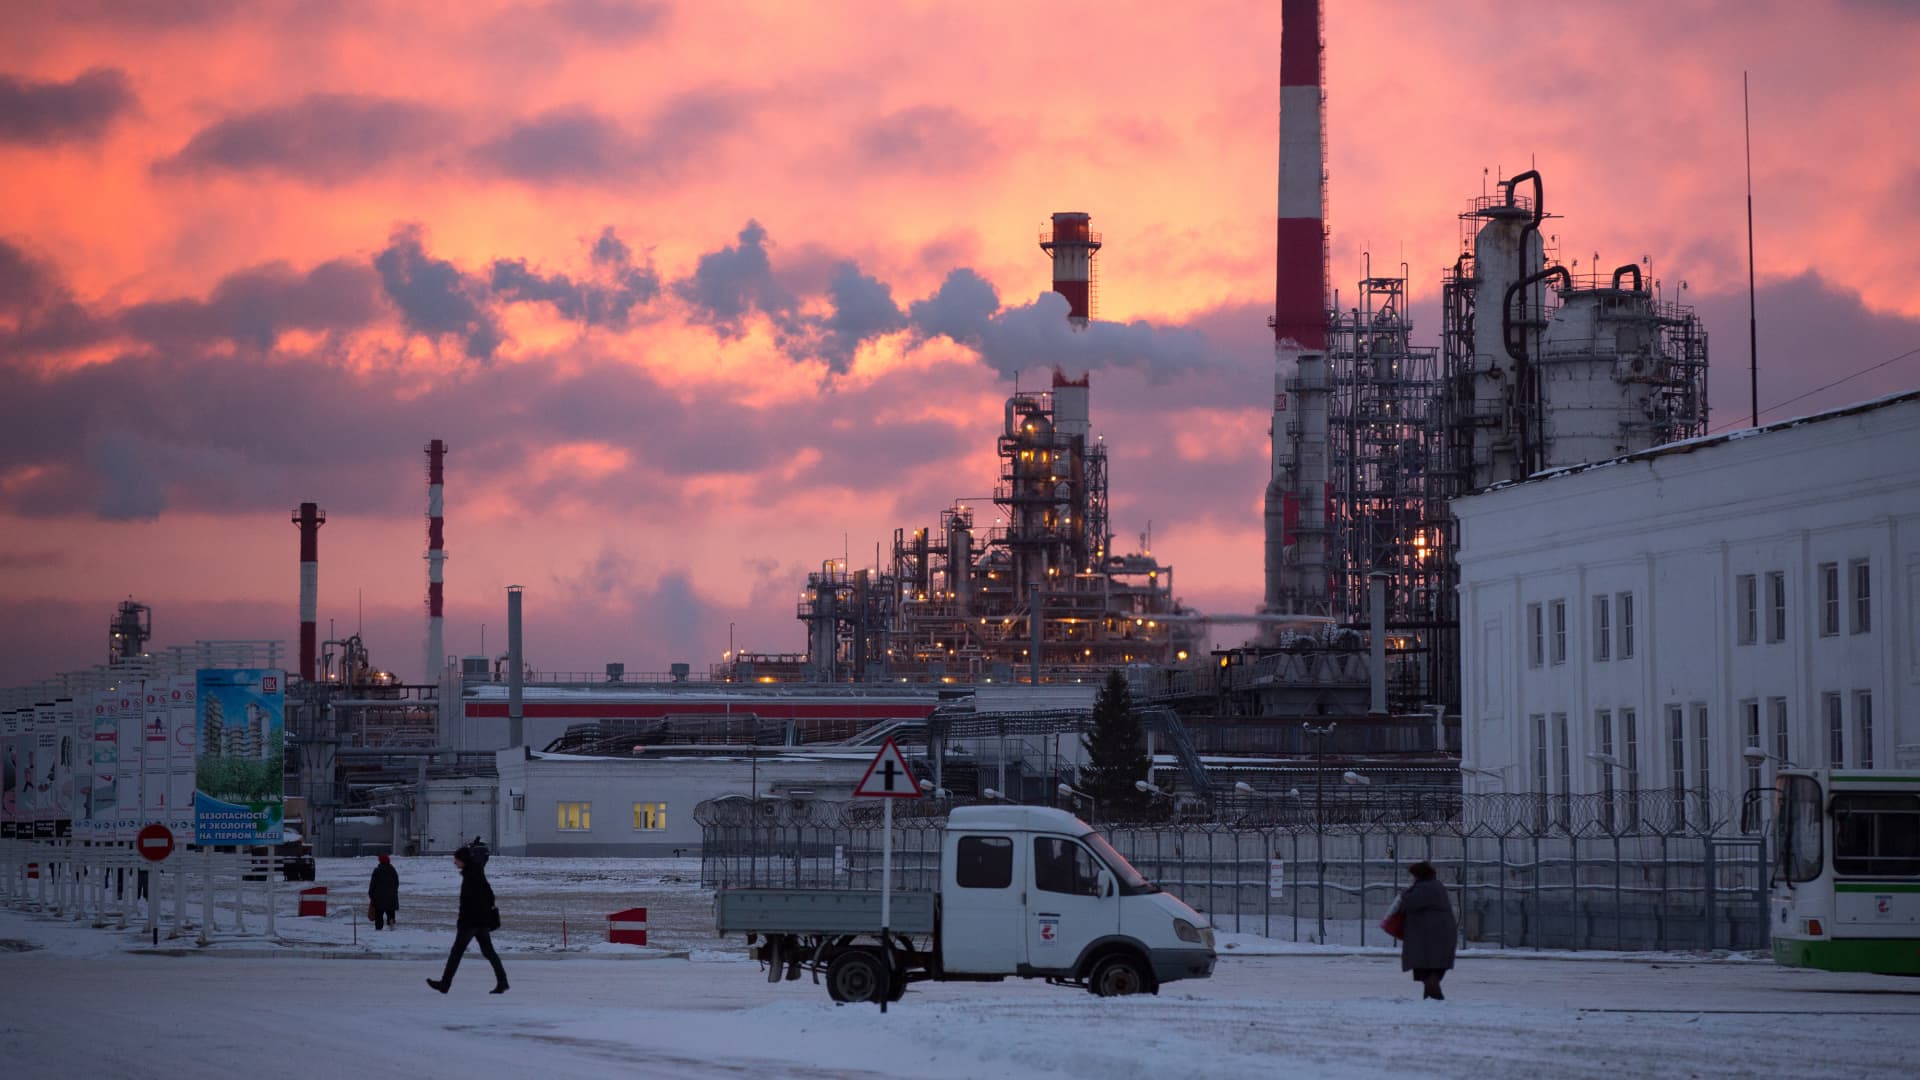 A red dawn illuminates cracking towers at the Lukoil-Nizhegorodnefteorgsintez (NORSI) oil refinery, operated by OAO Lukoil, in Nizhny Novgorod, Russia.